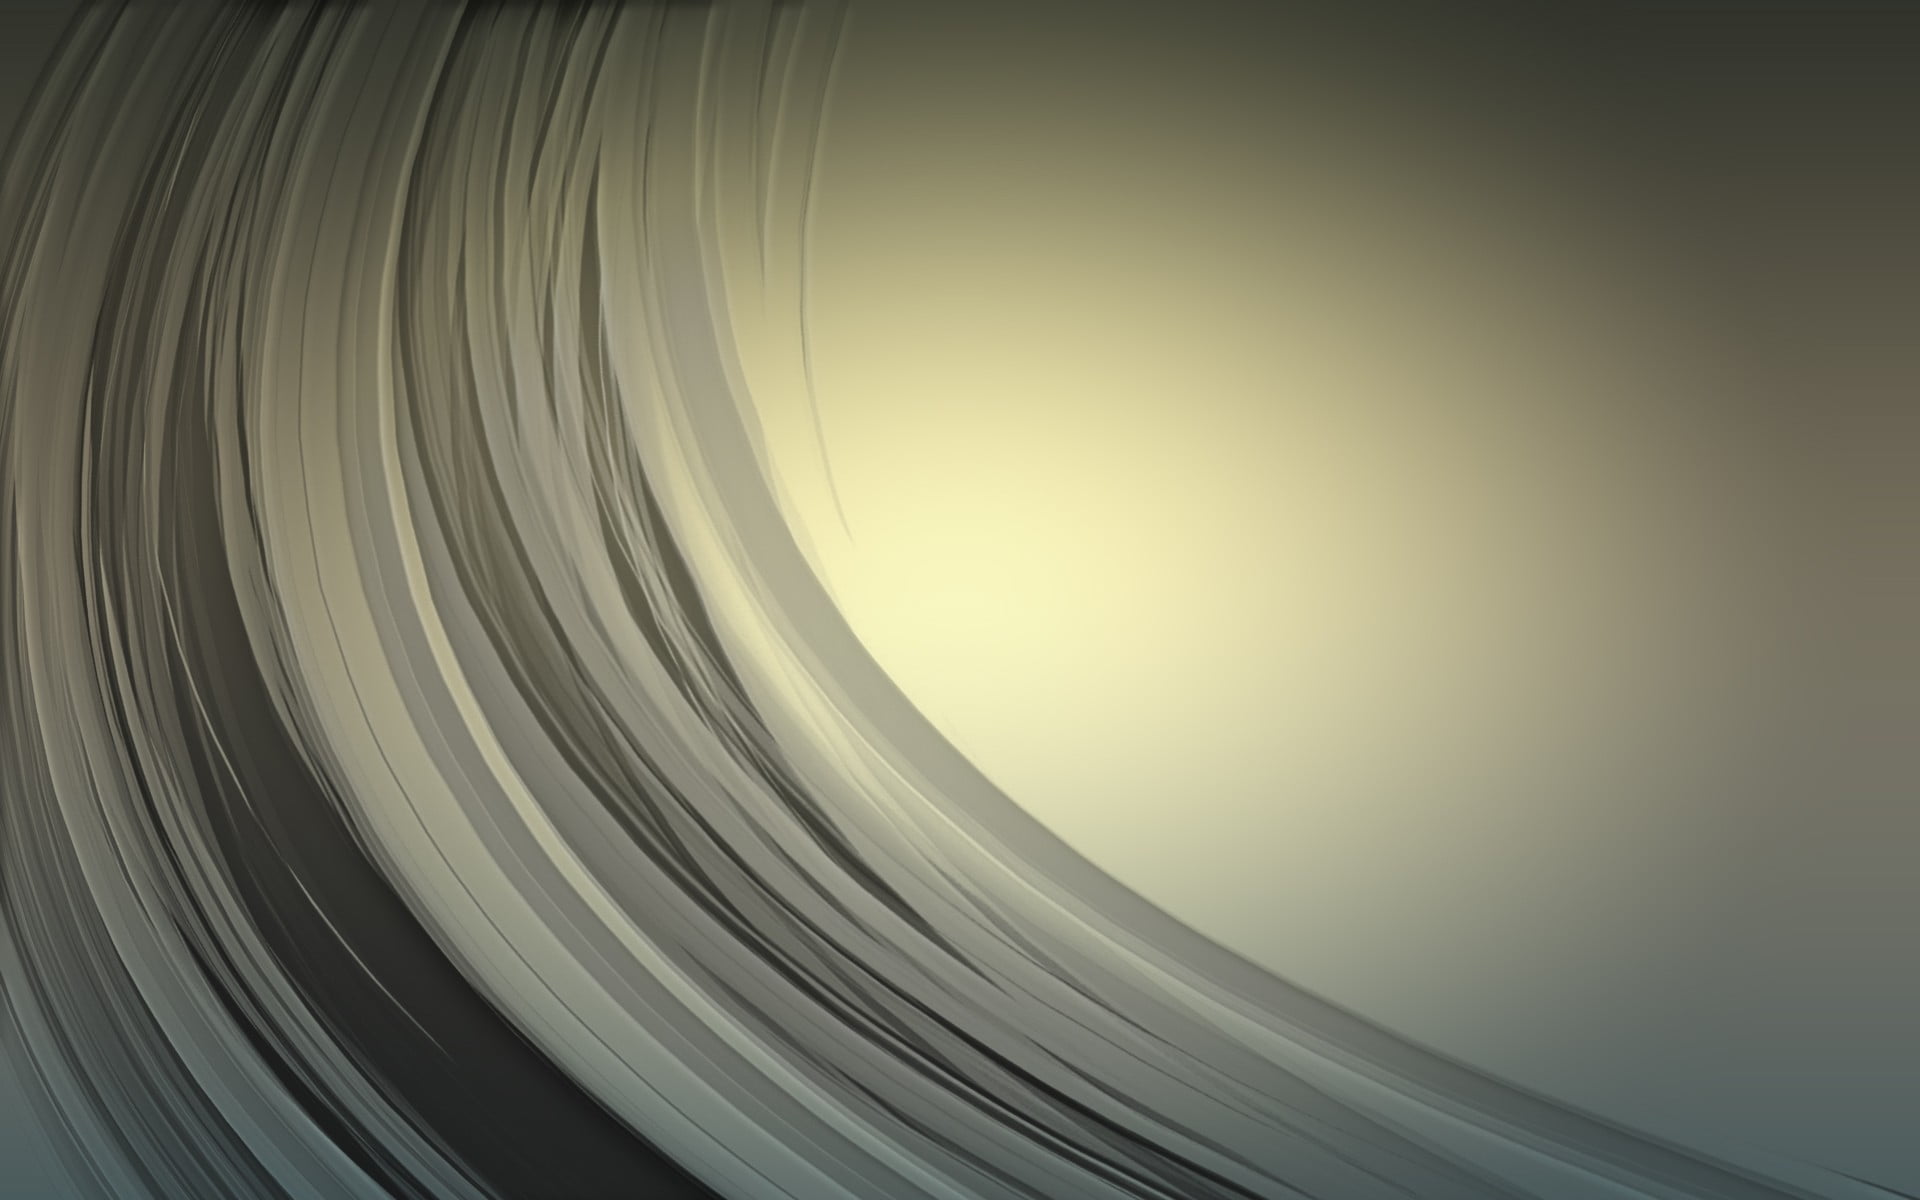 gray waves illustration, simple background, minimalism, abstract